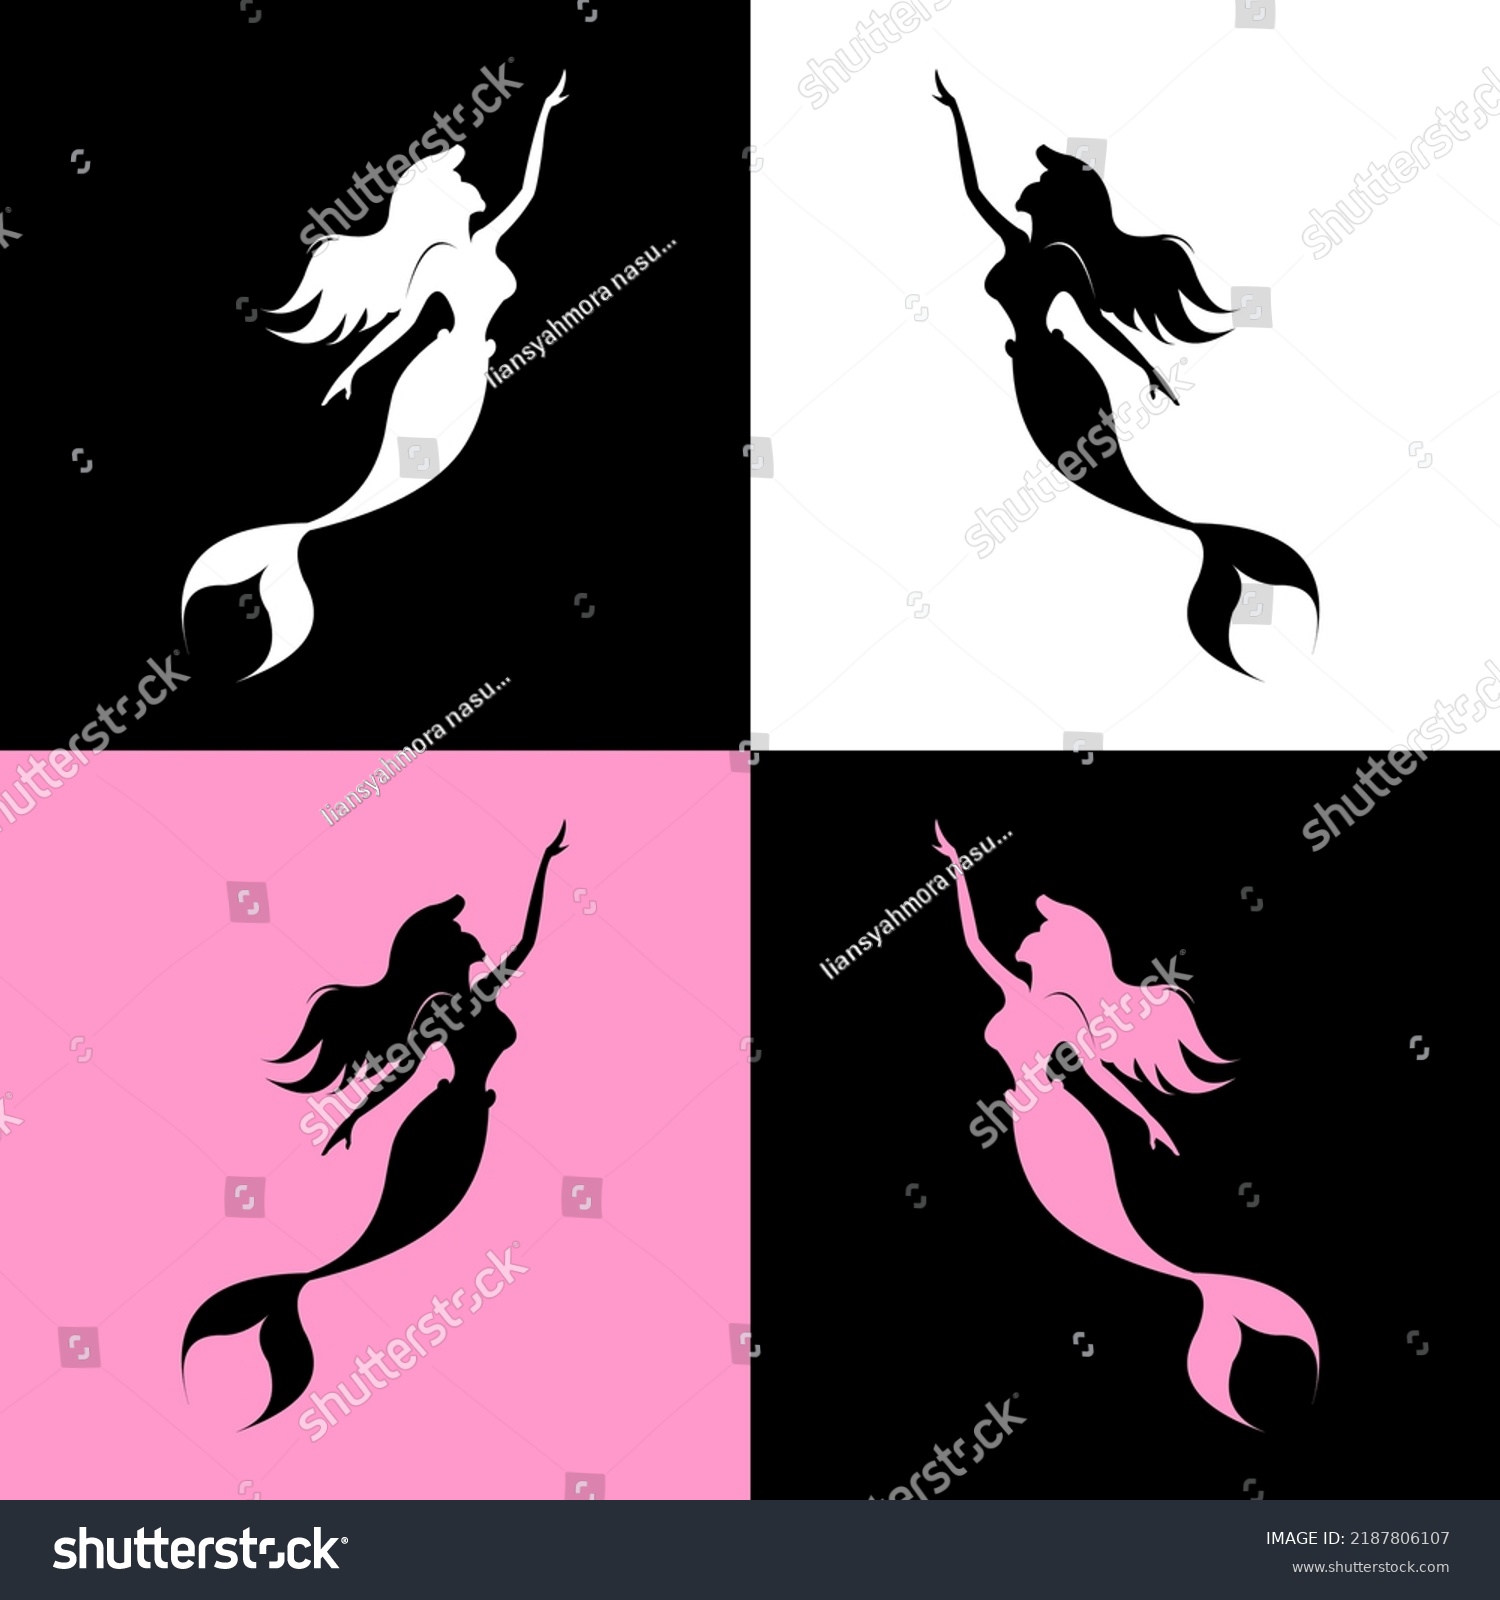 SVG of swimming mermaid logo vector in black, white and pink colors svg